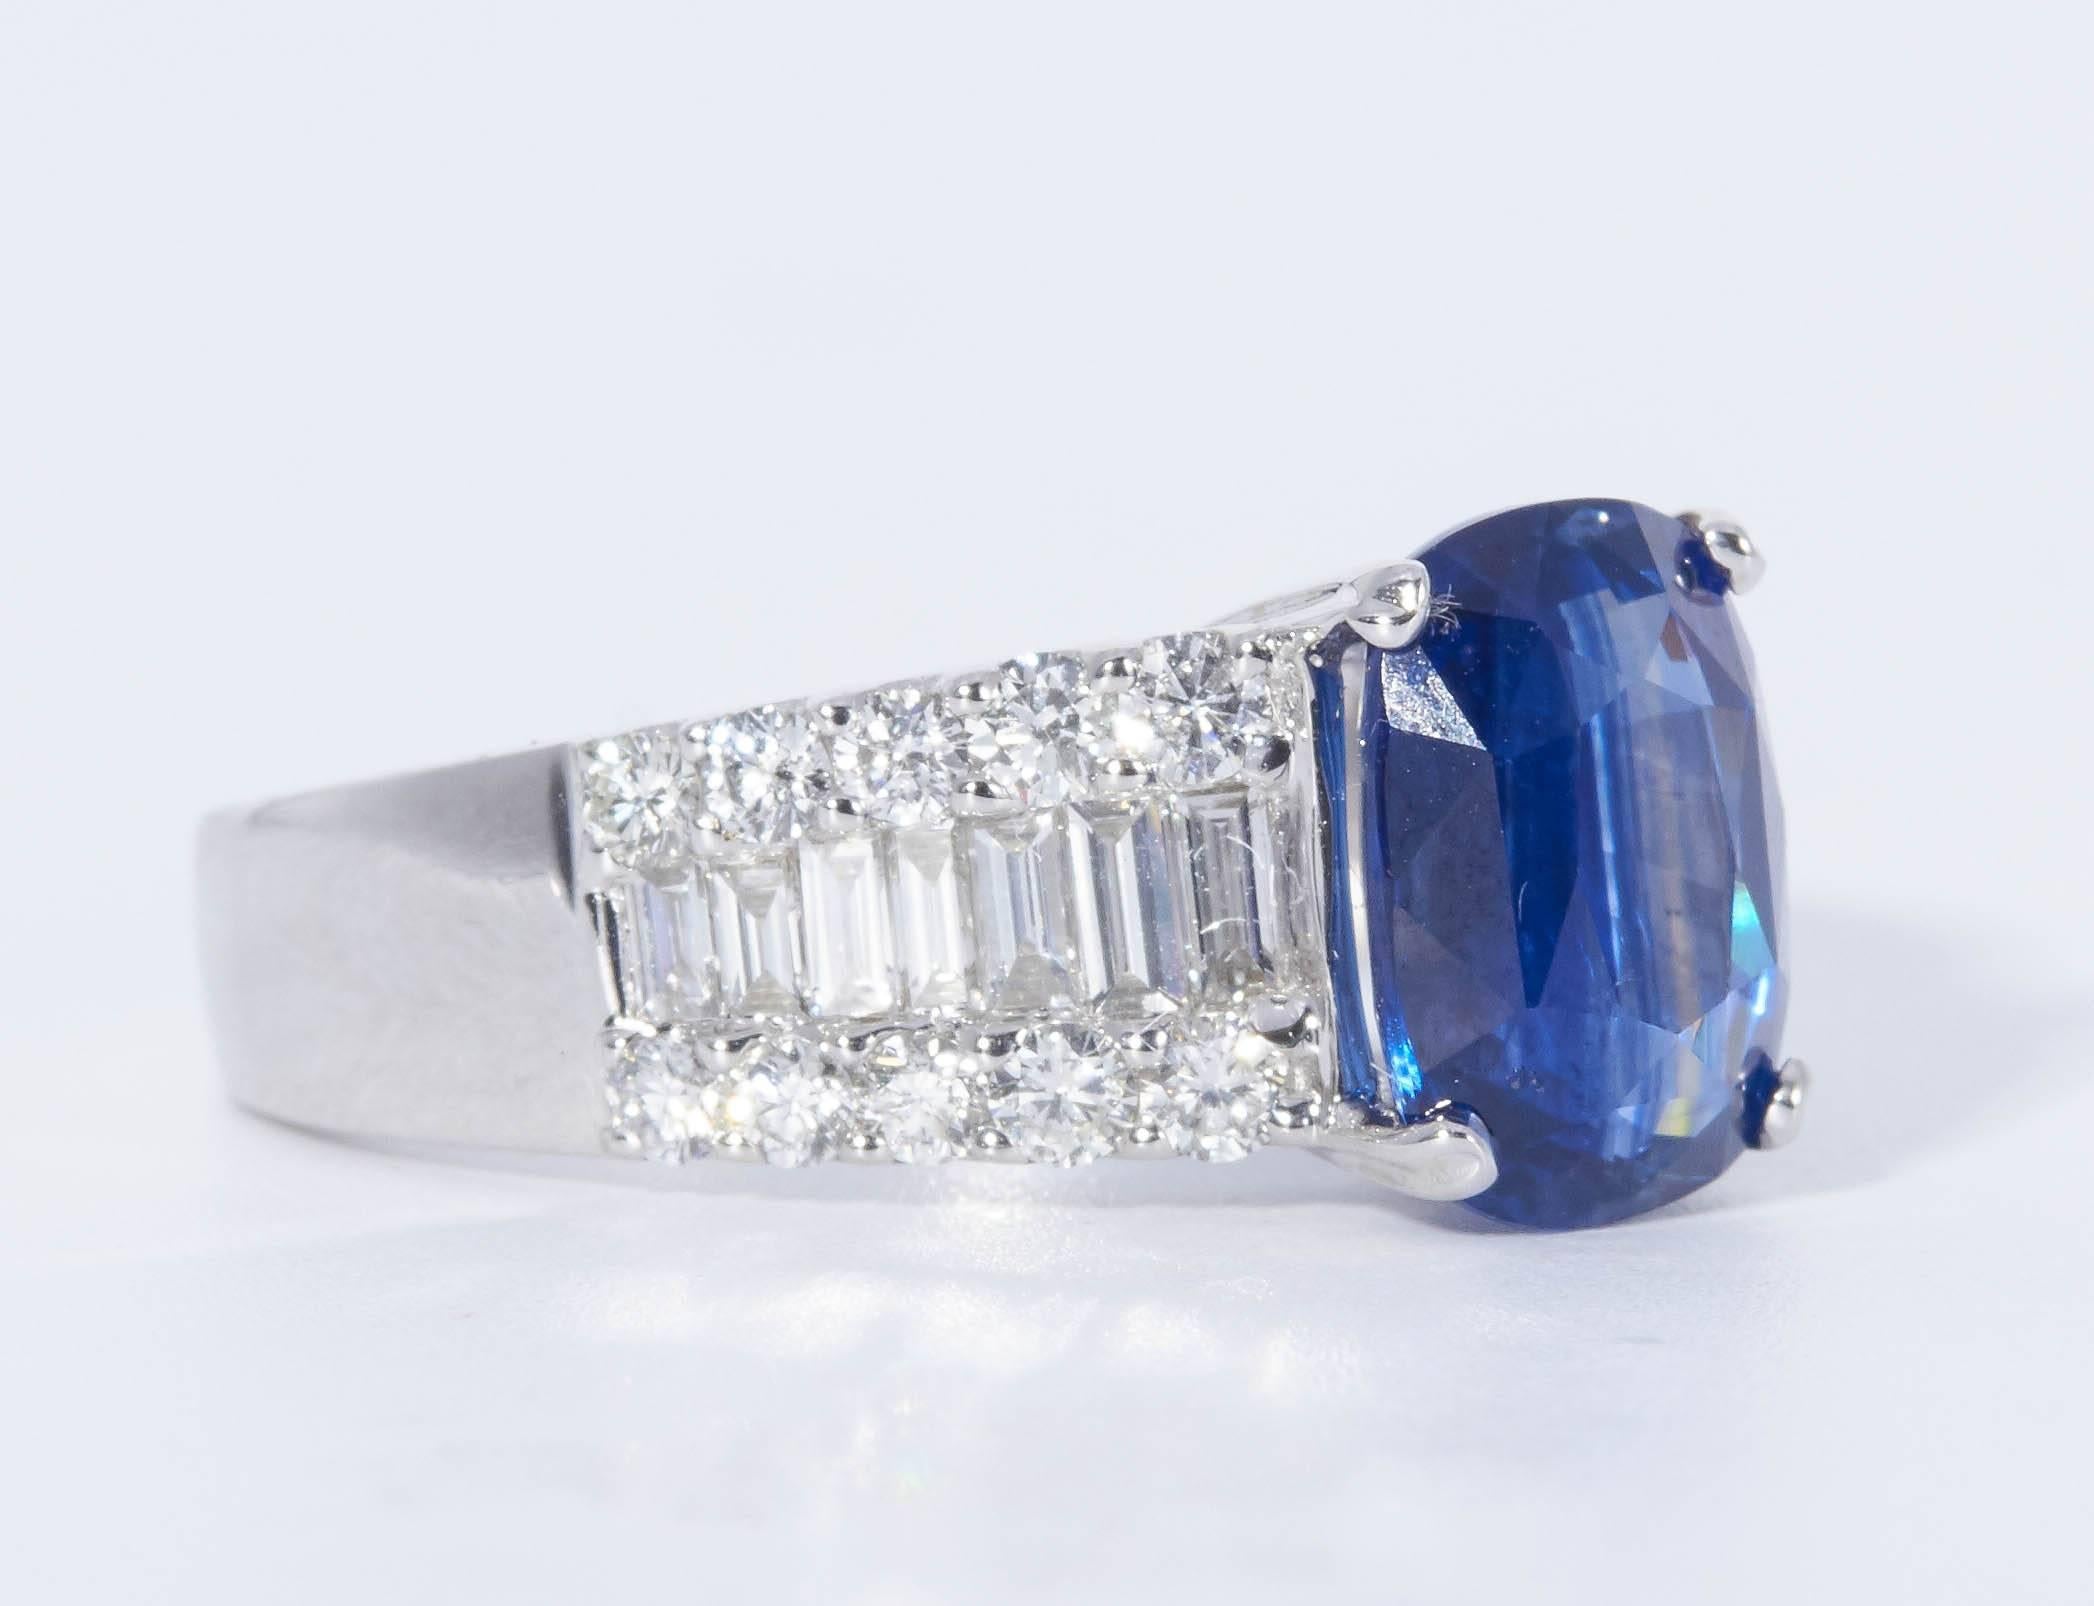 Oval Sapphire 3.52 Carats
Diamonds: 1.01 Carats
18K White Gold 
It Comes with a retail appraisal
All our gemstones are genuine and are sourced with the highest degree of integrity